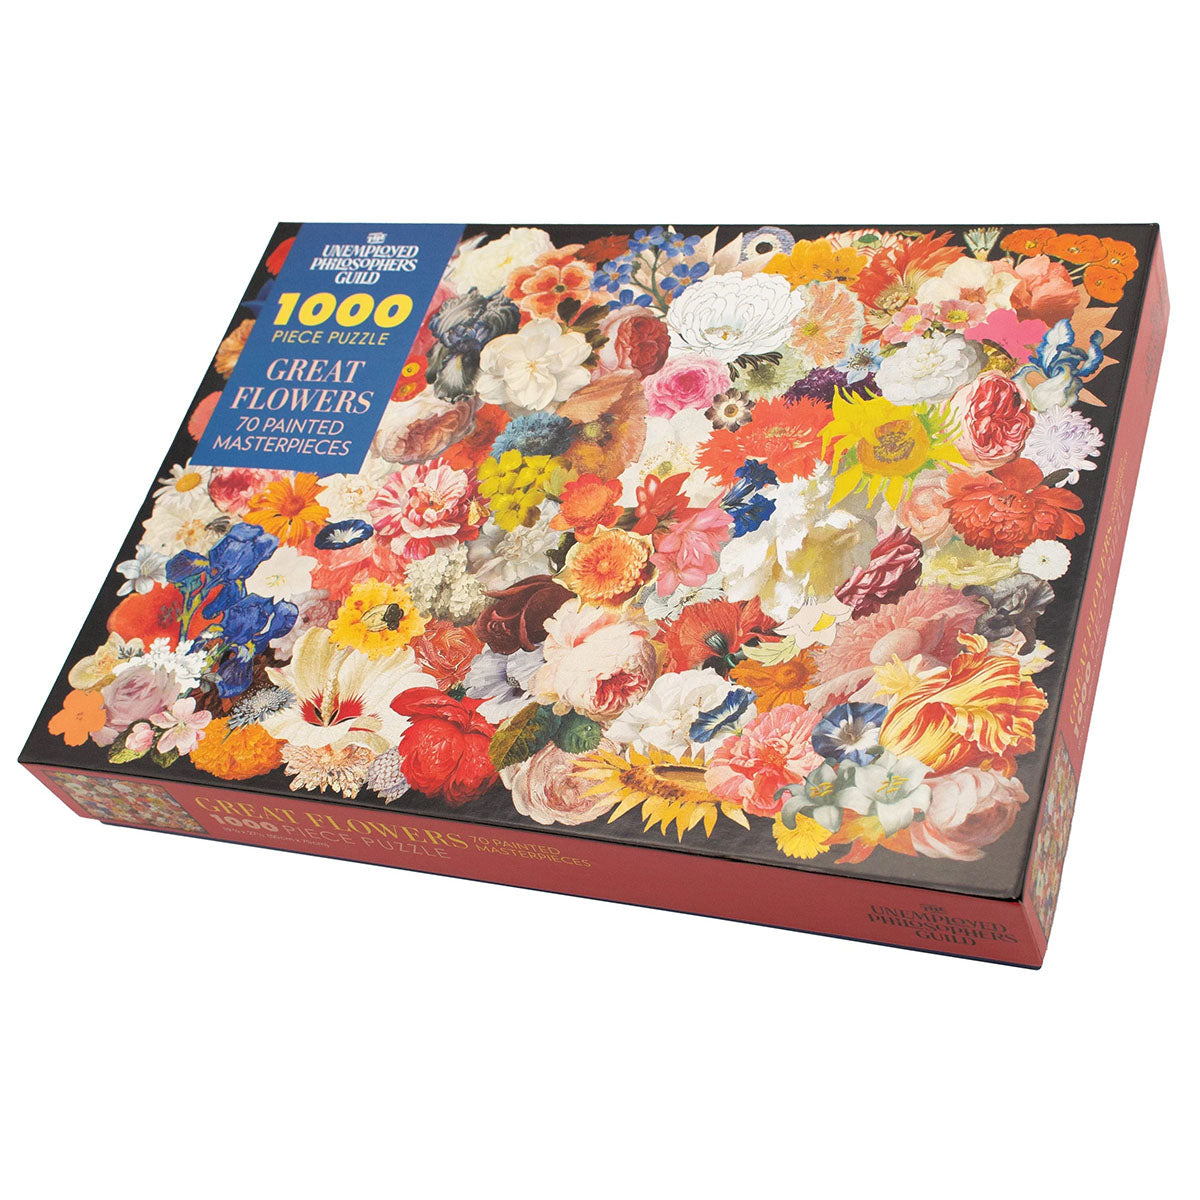 Great Flowers of Art | 1,000 Piece Jigsaw Puzzle